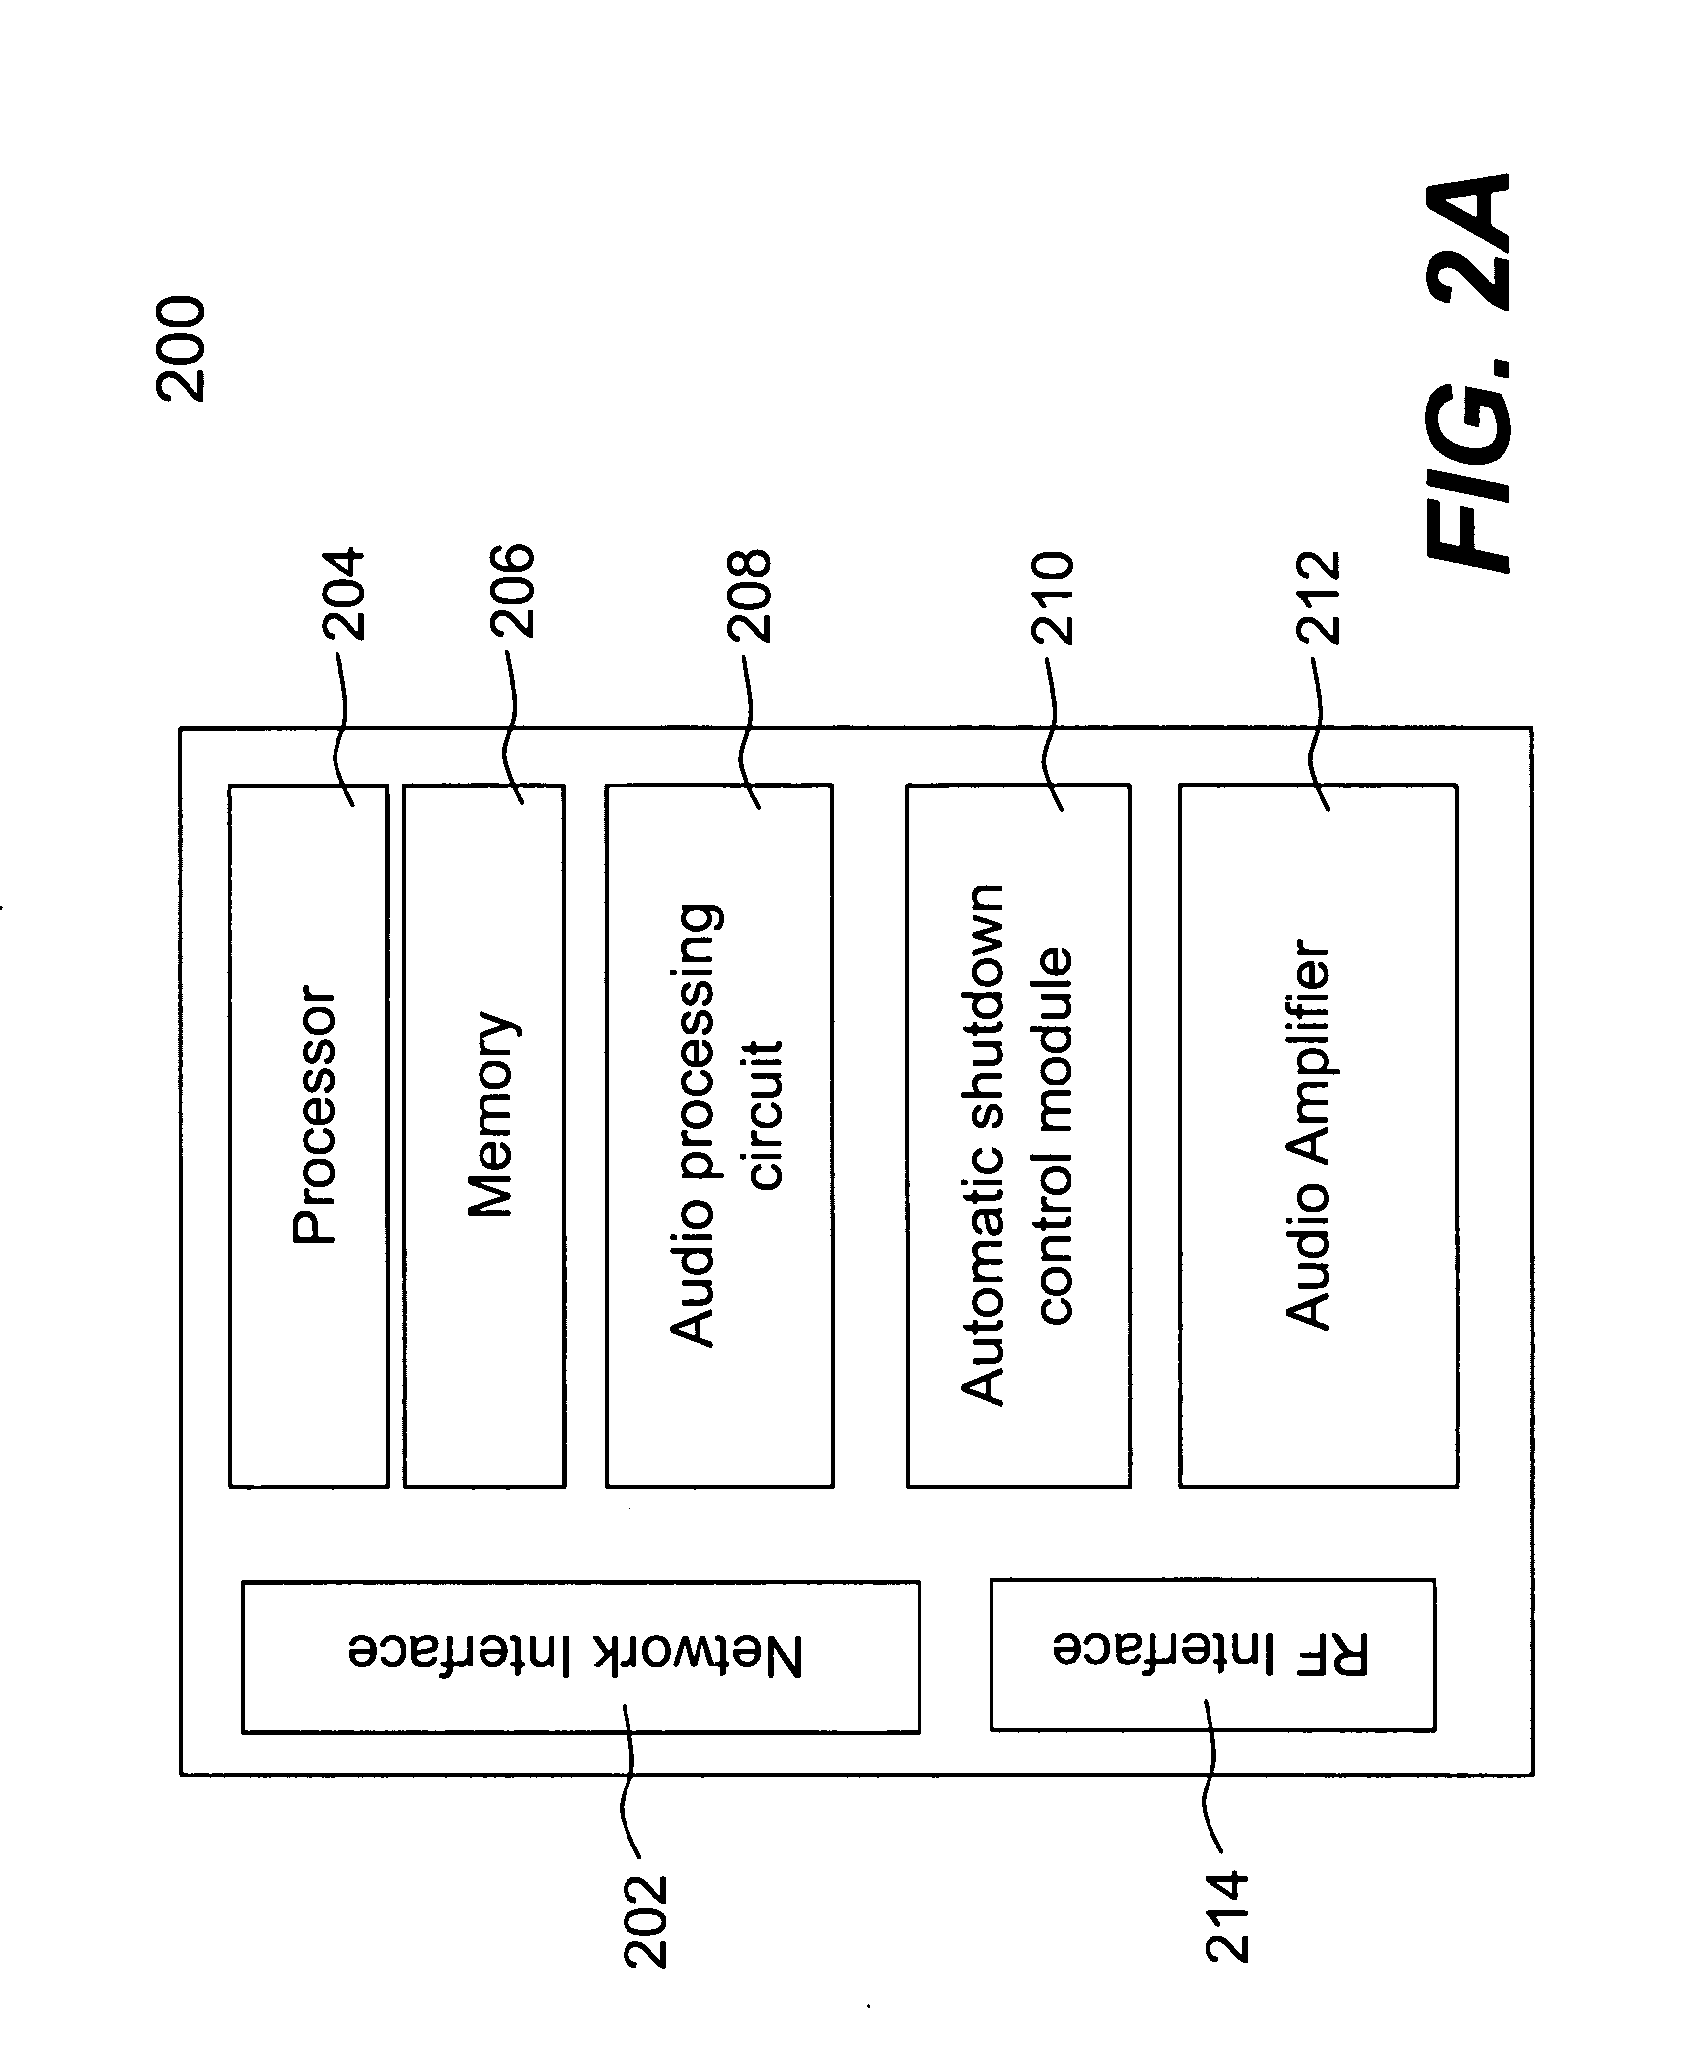 Method and system for controlling amplifiers